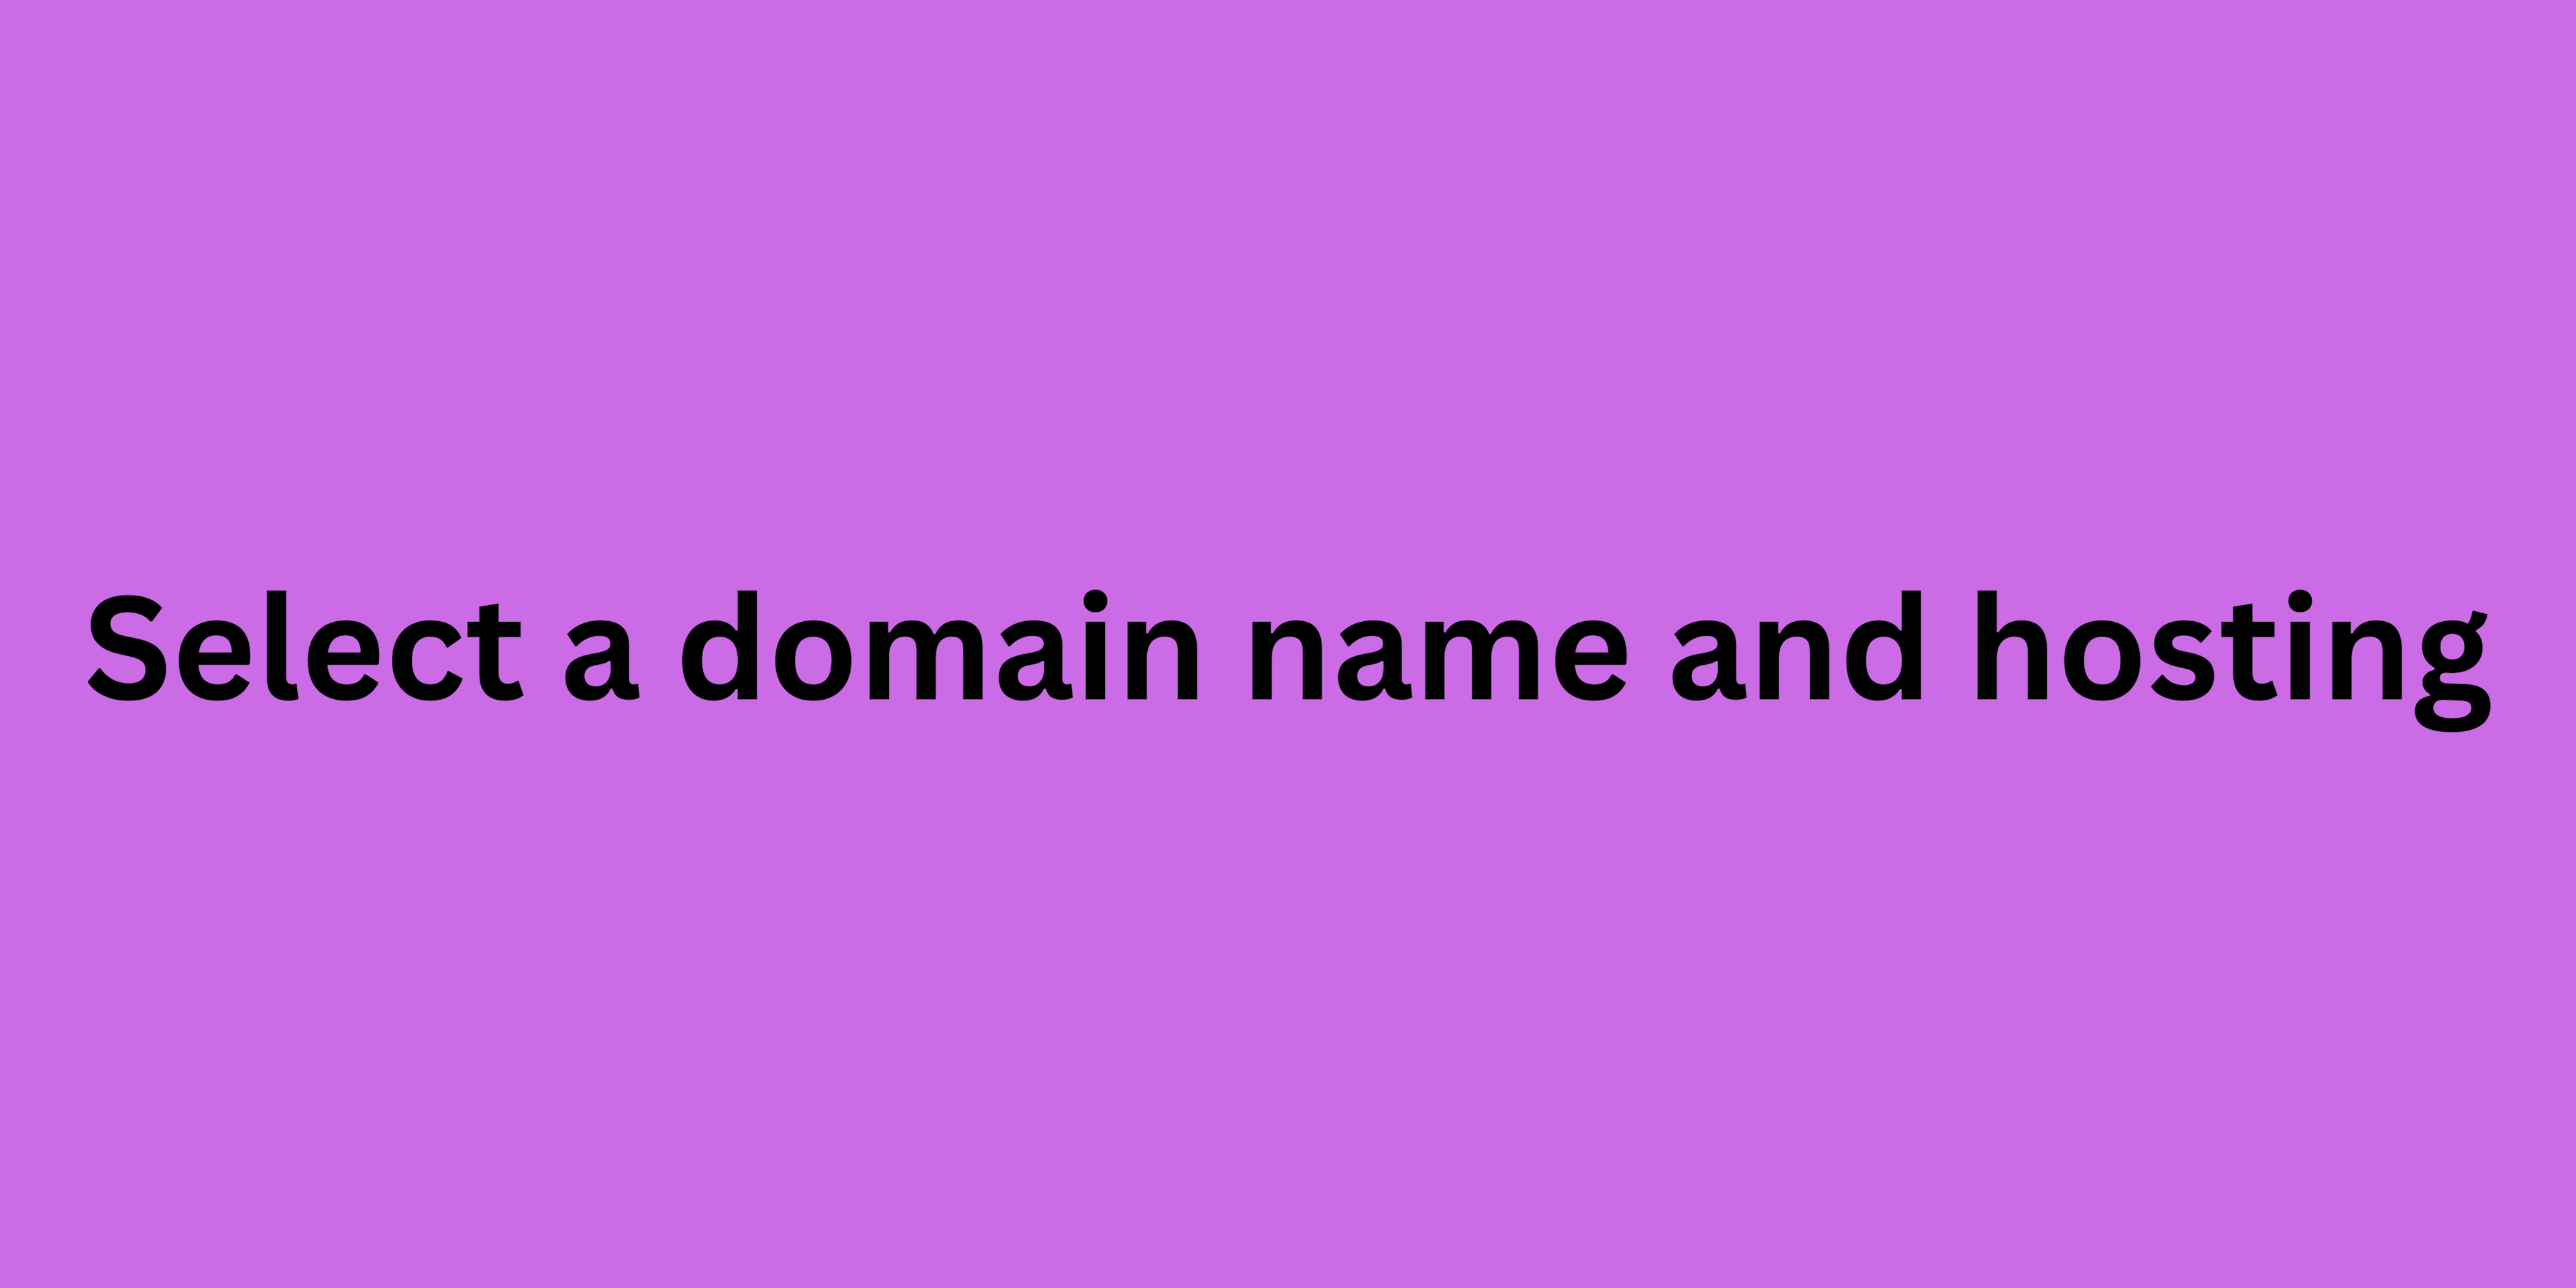 Select a domain name and hosting